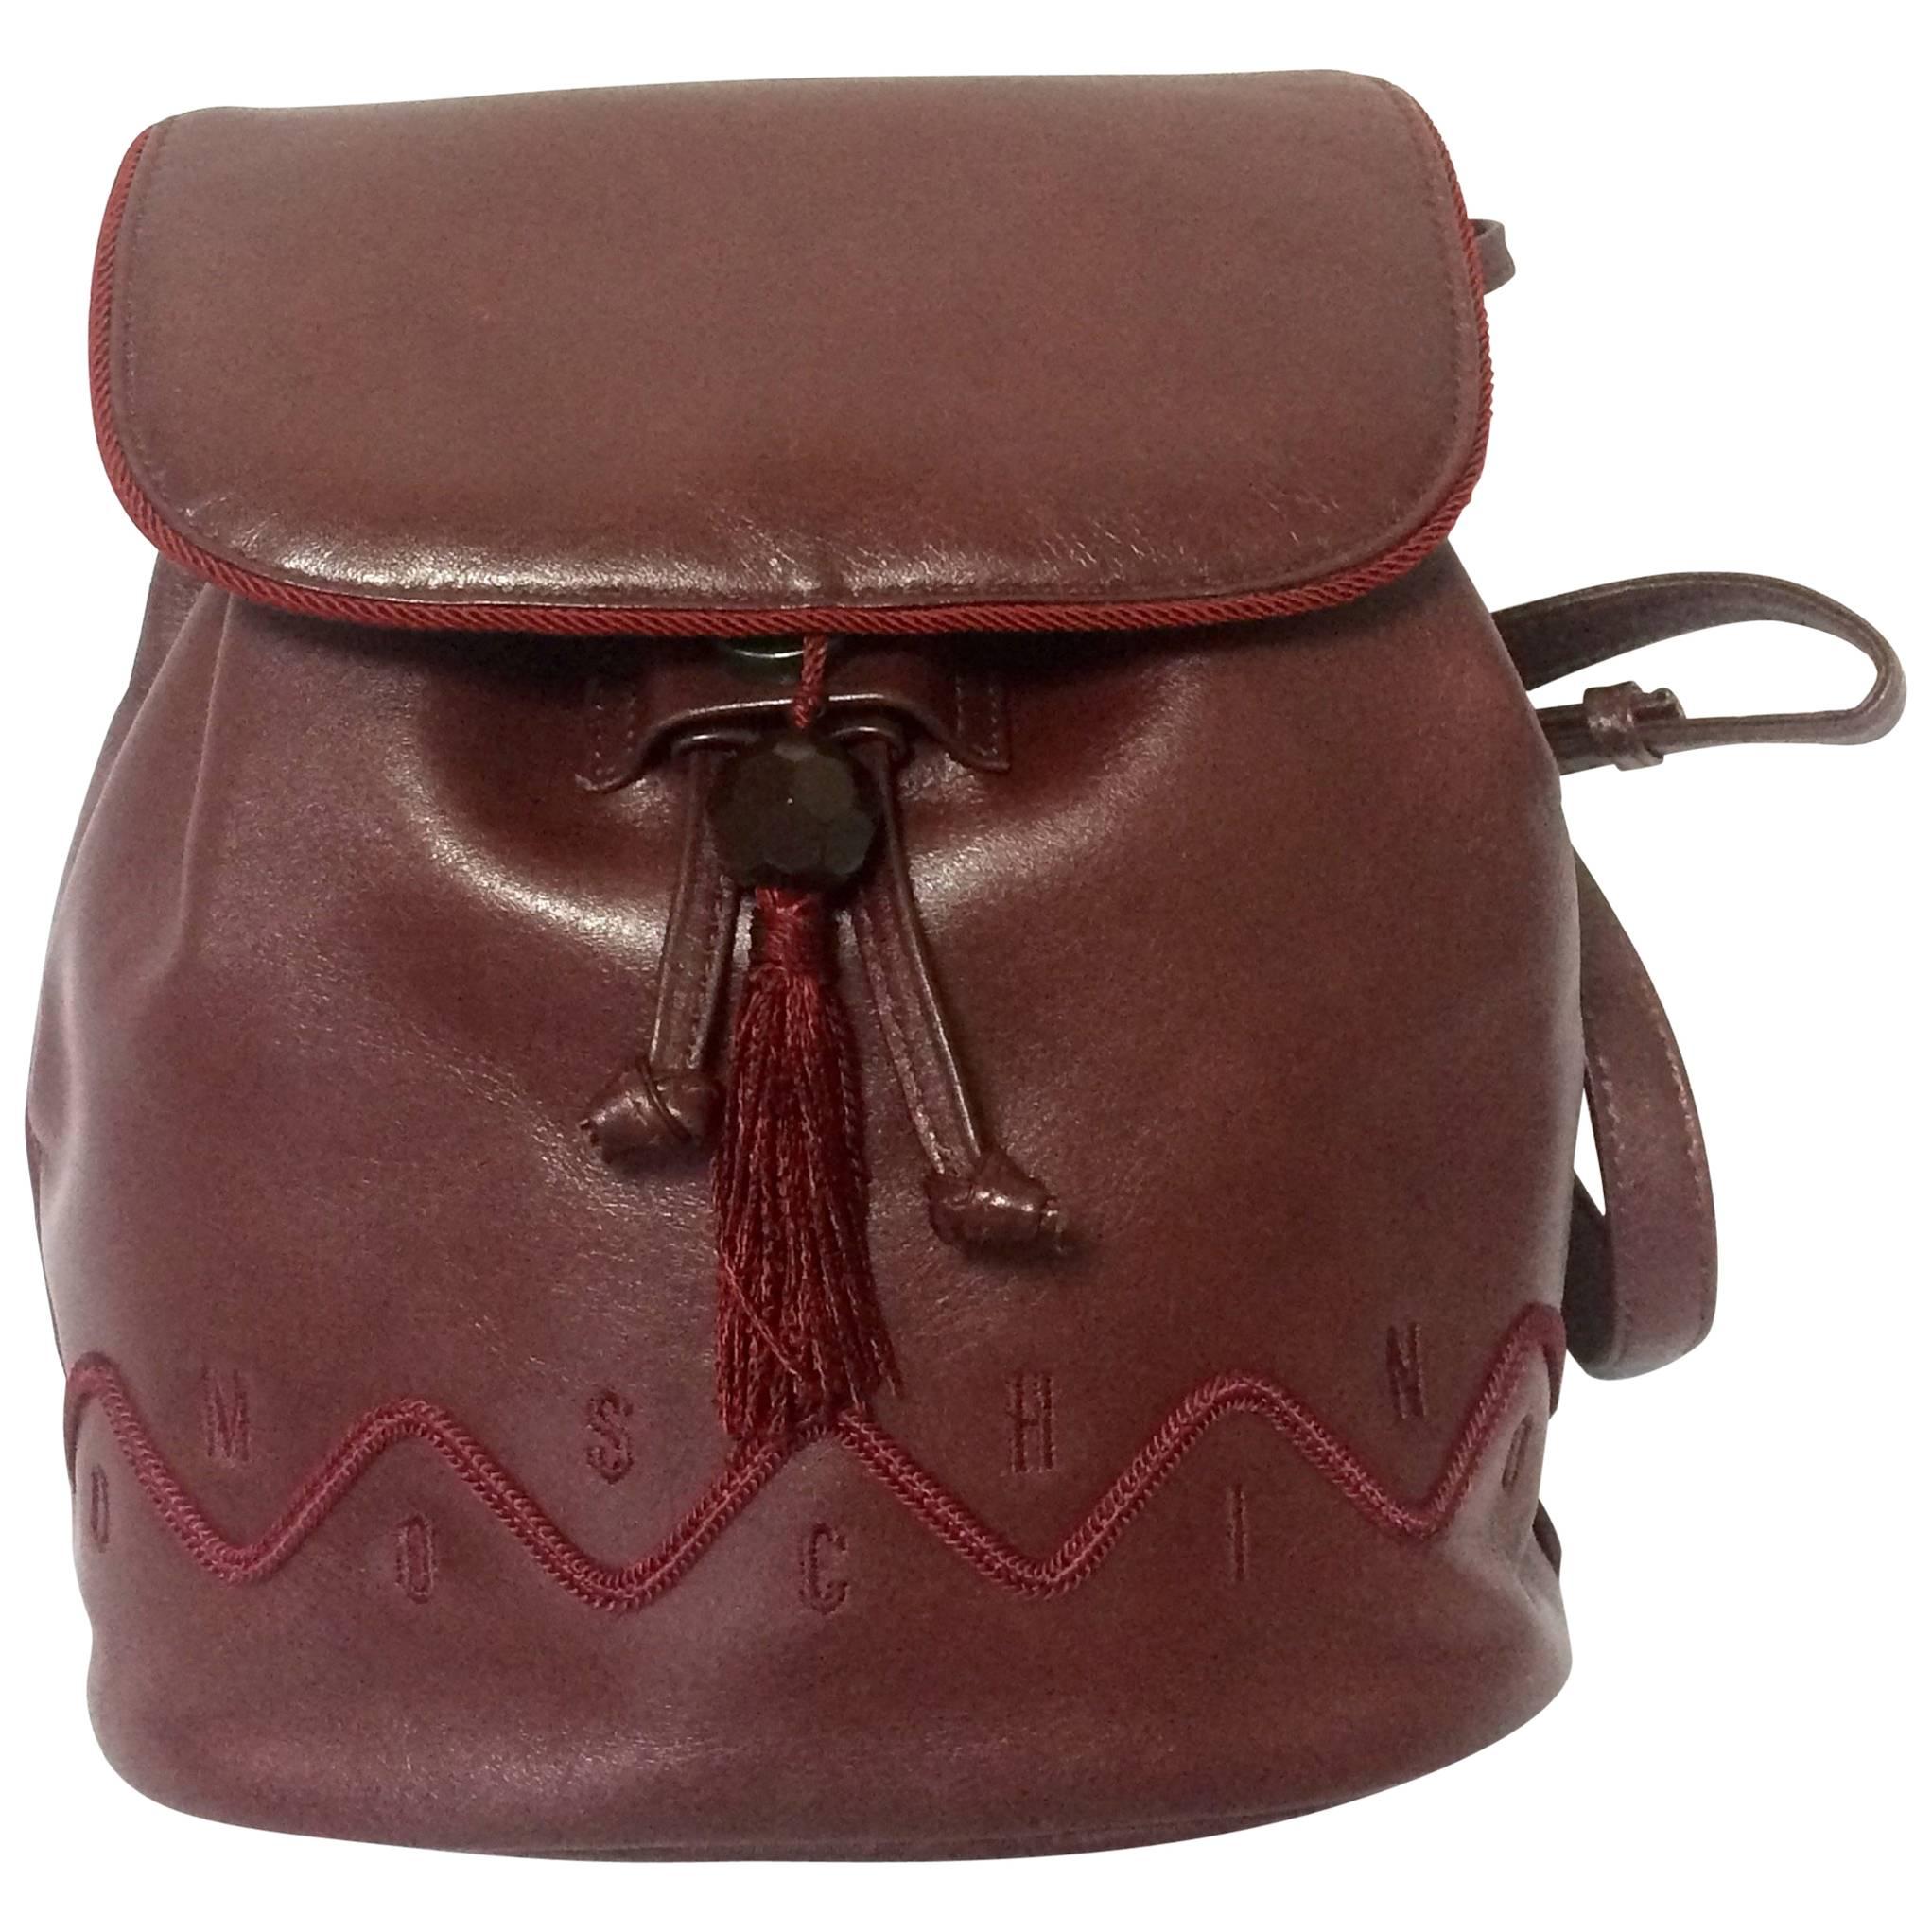 Vintage MOSCHINO dark wine leather backpack with tassel and logo embroidery. For Sale